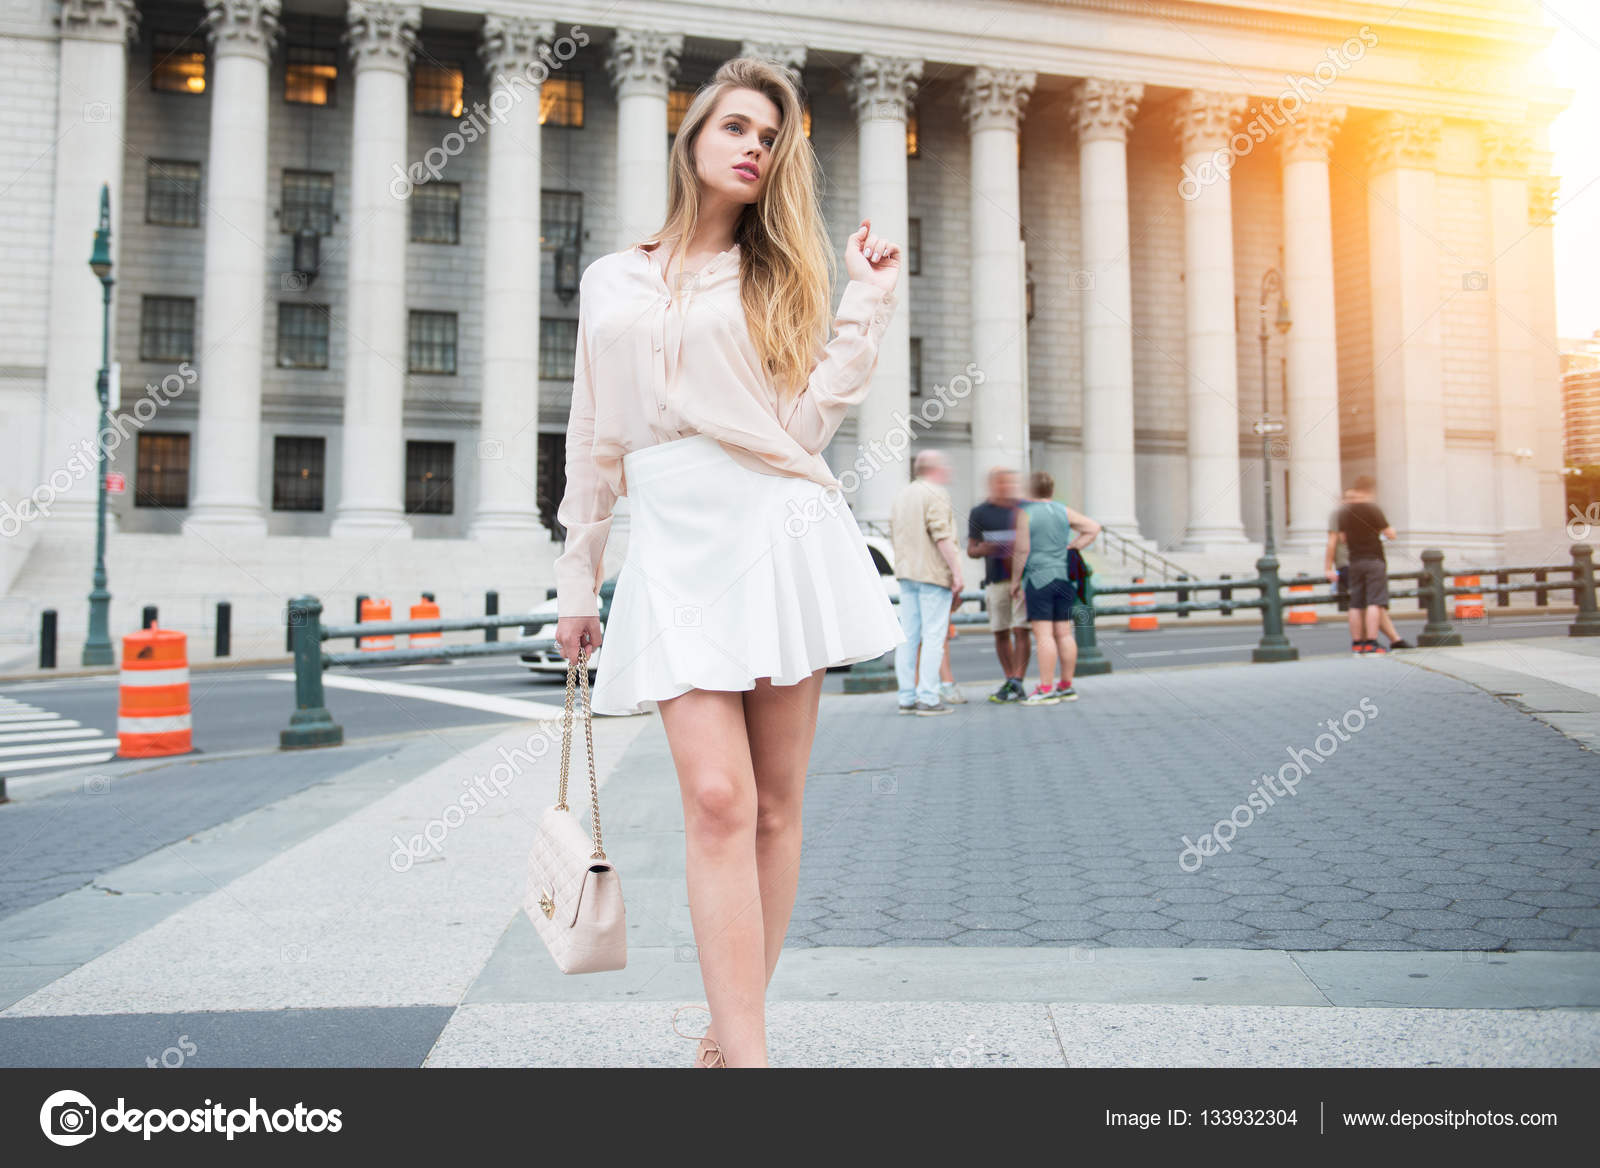 Fashionable city girl concept. Gorgeous young woman walking near